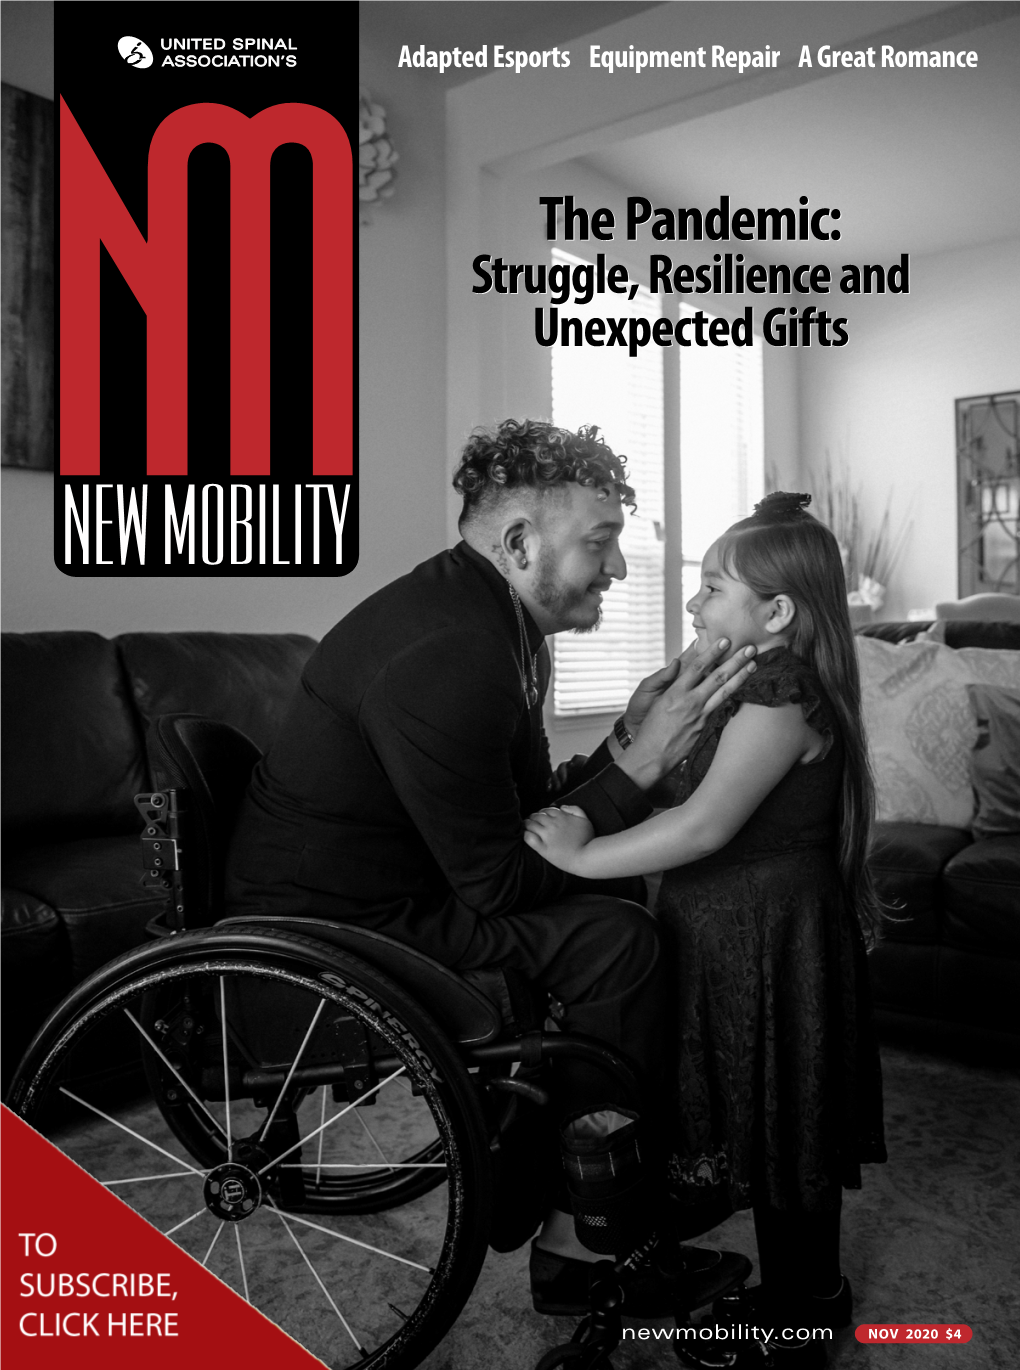 The Pandemic: Struggle, Resilience and Unexpected Gifts